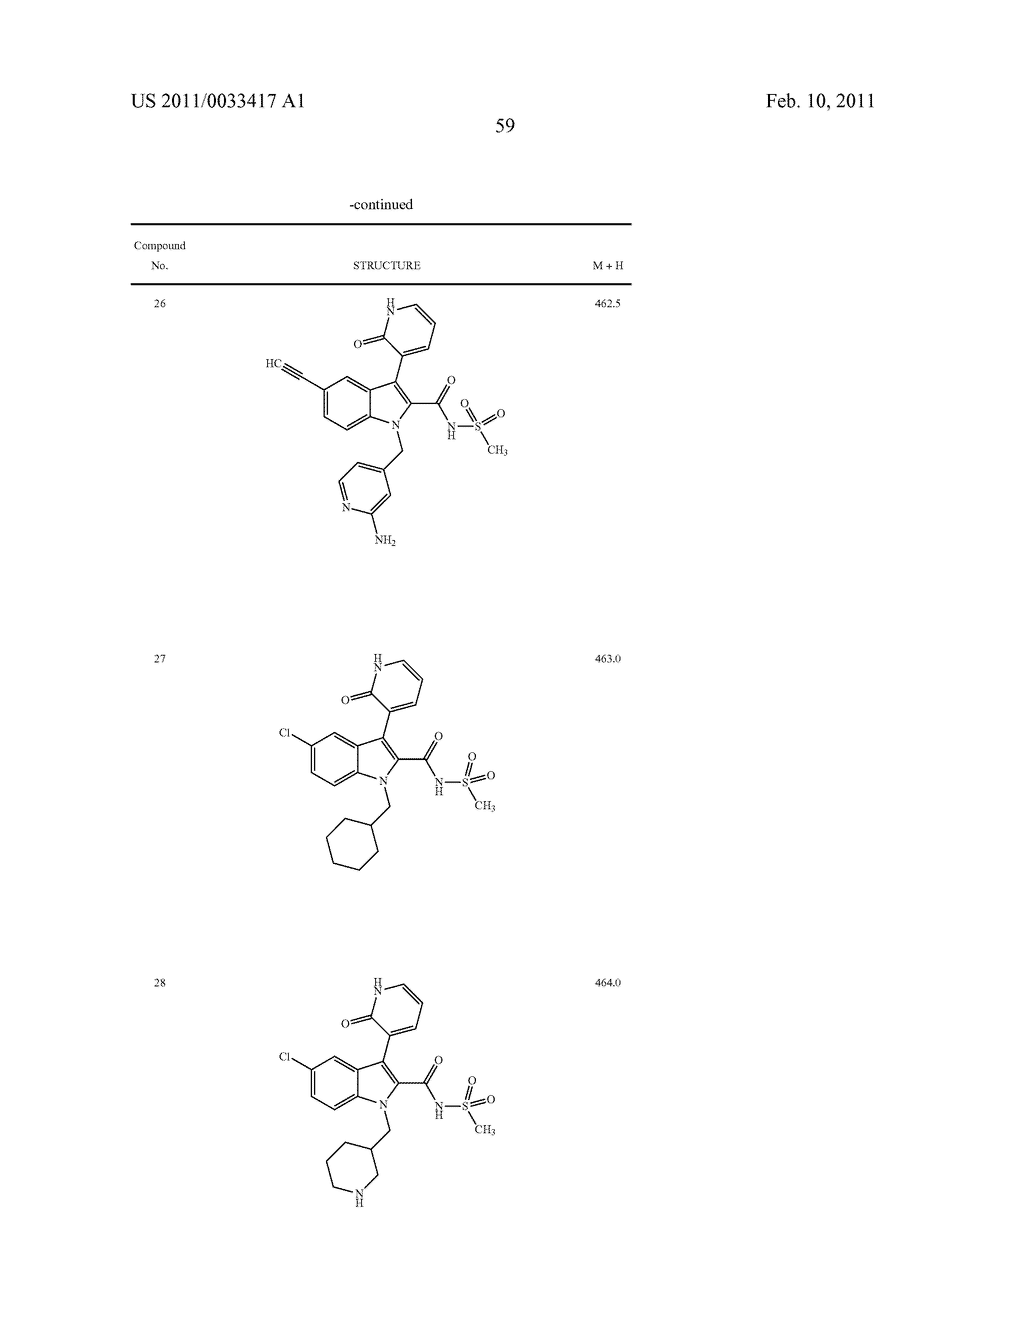 2,3-SUBSTITUTED INDOLE DERIVATIVES FOR TREATING VIRAL INFECTIONS - diagram, schematic, and image 60